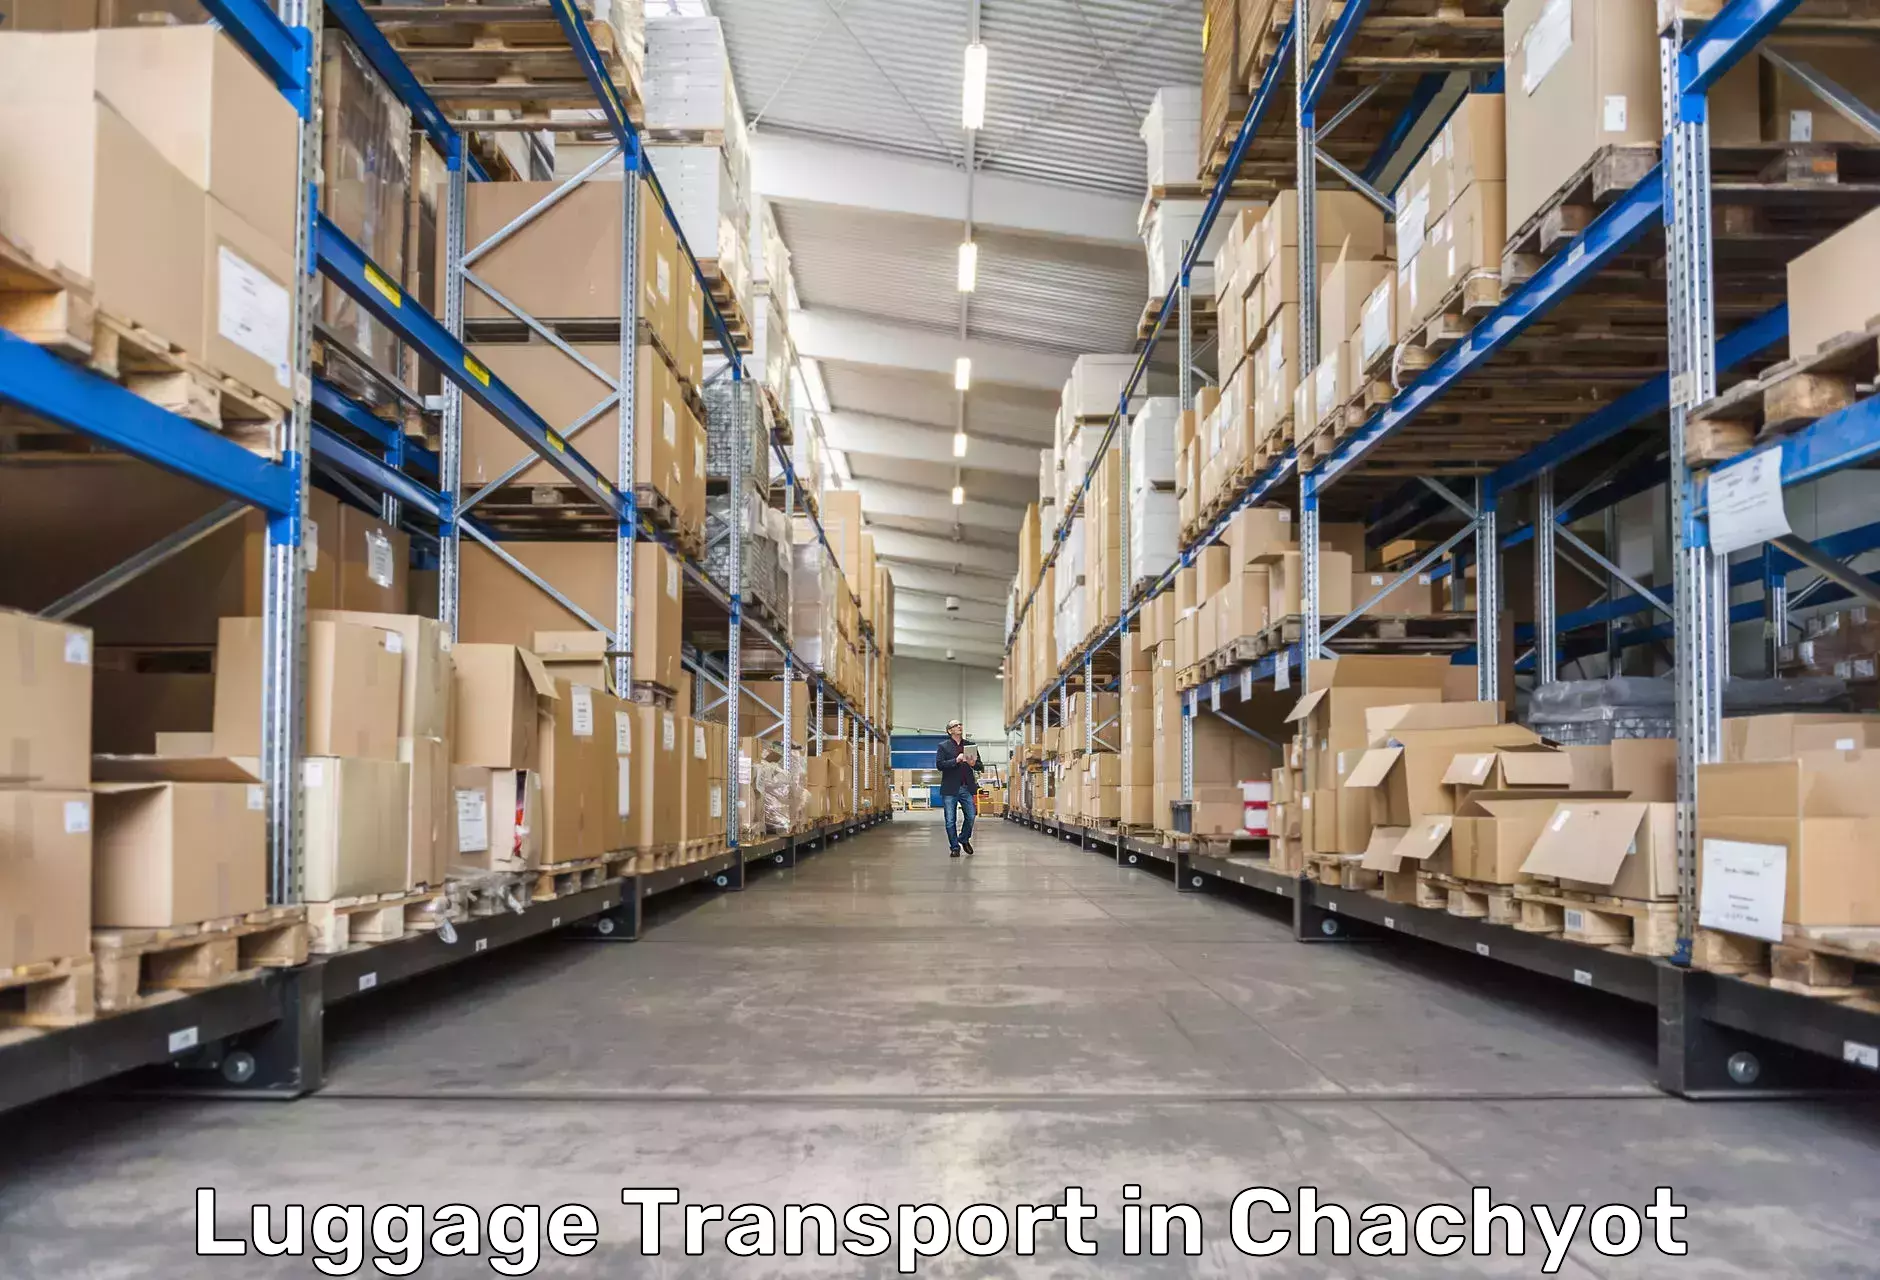 Business luggage transport in Chachyot